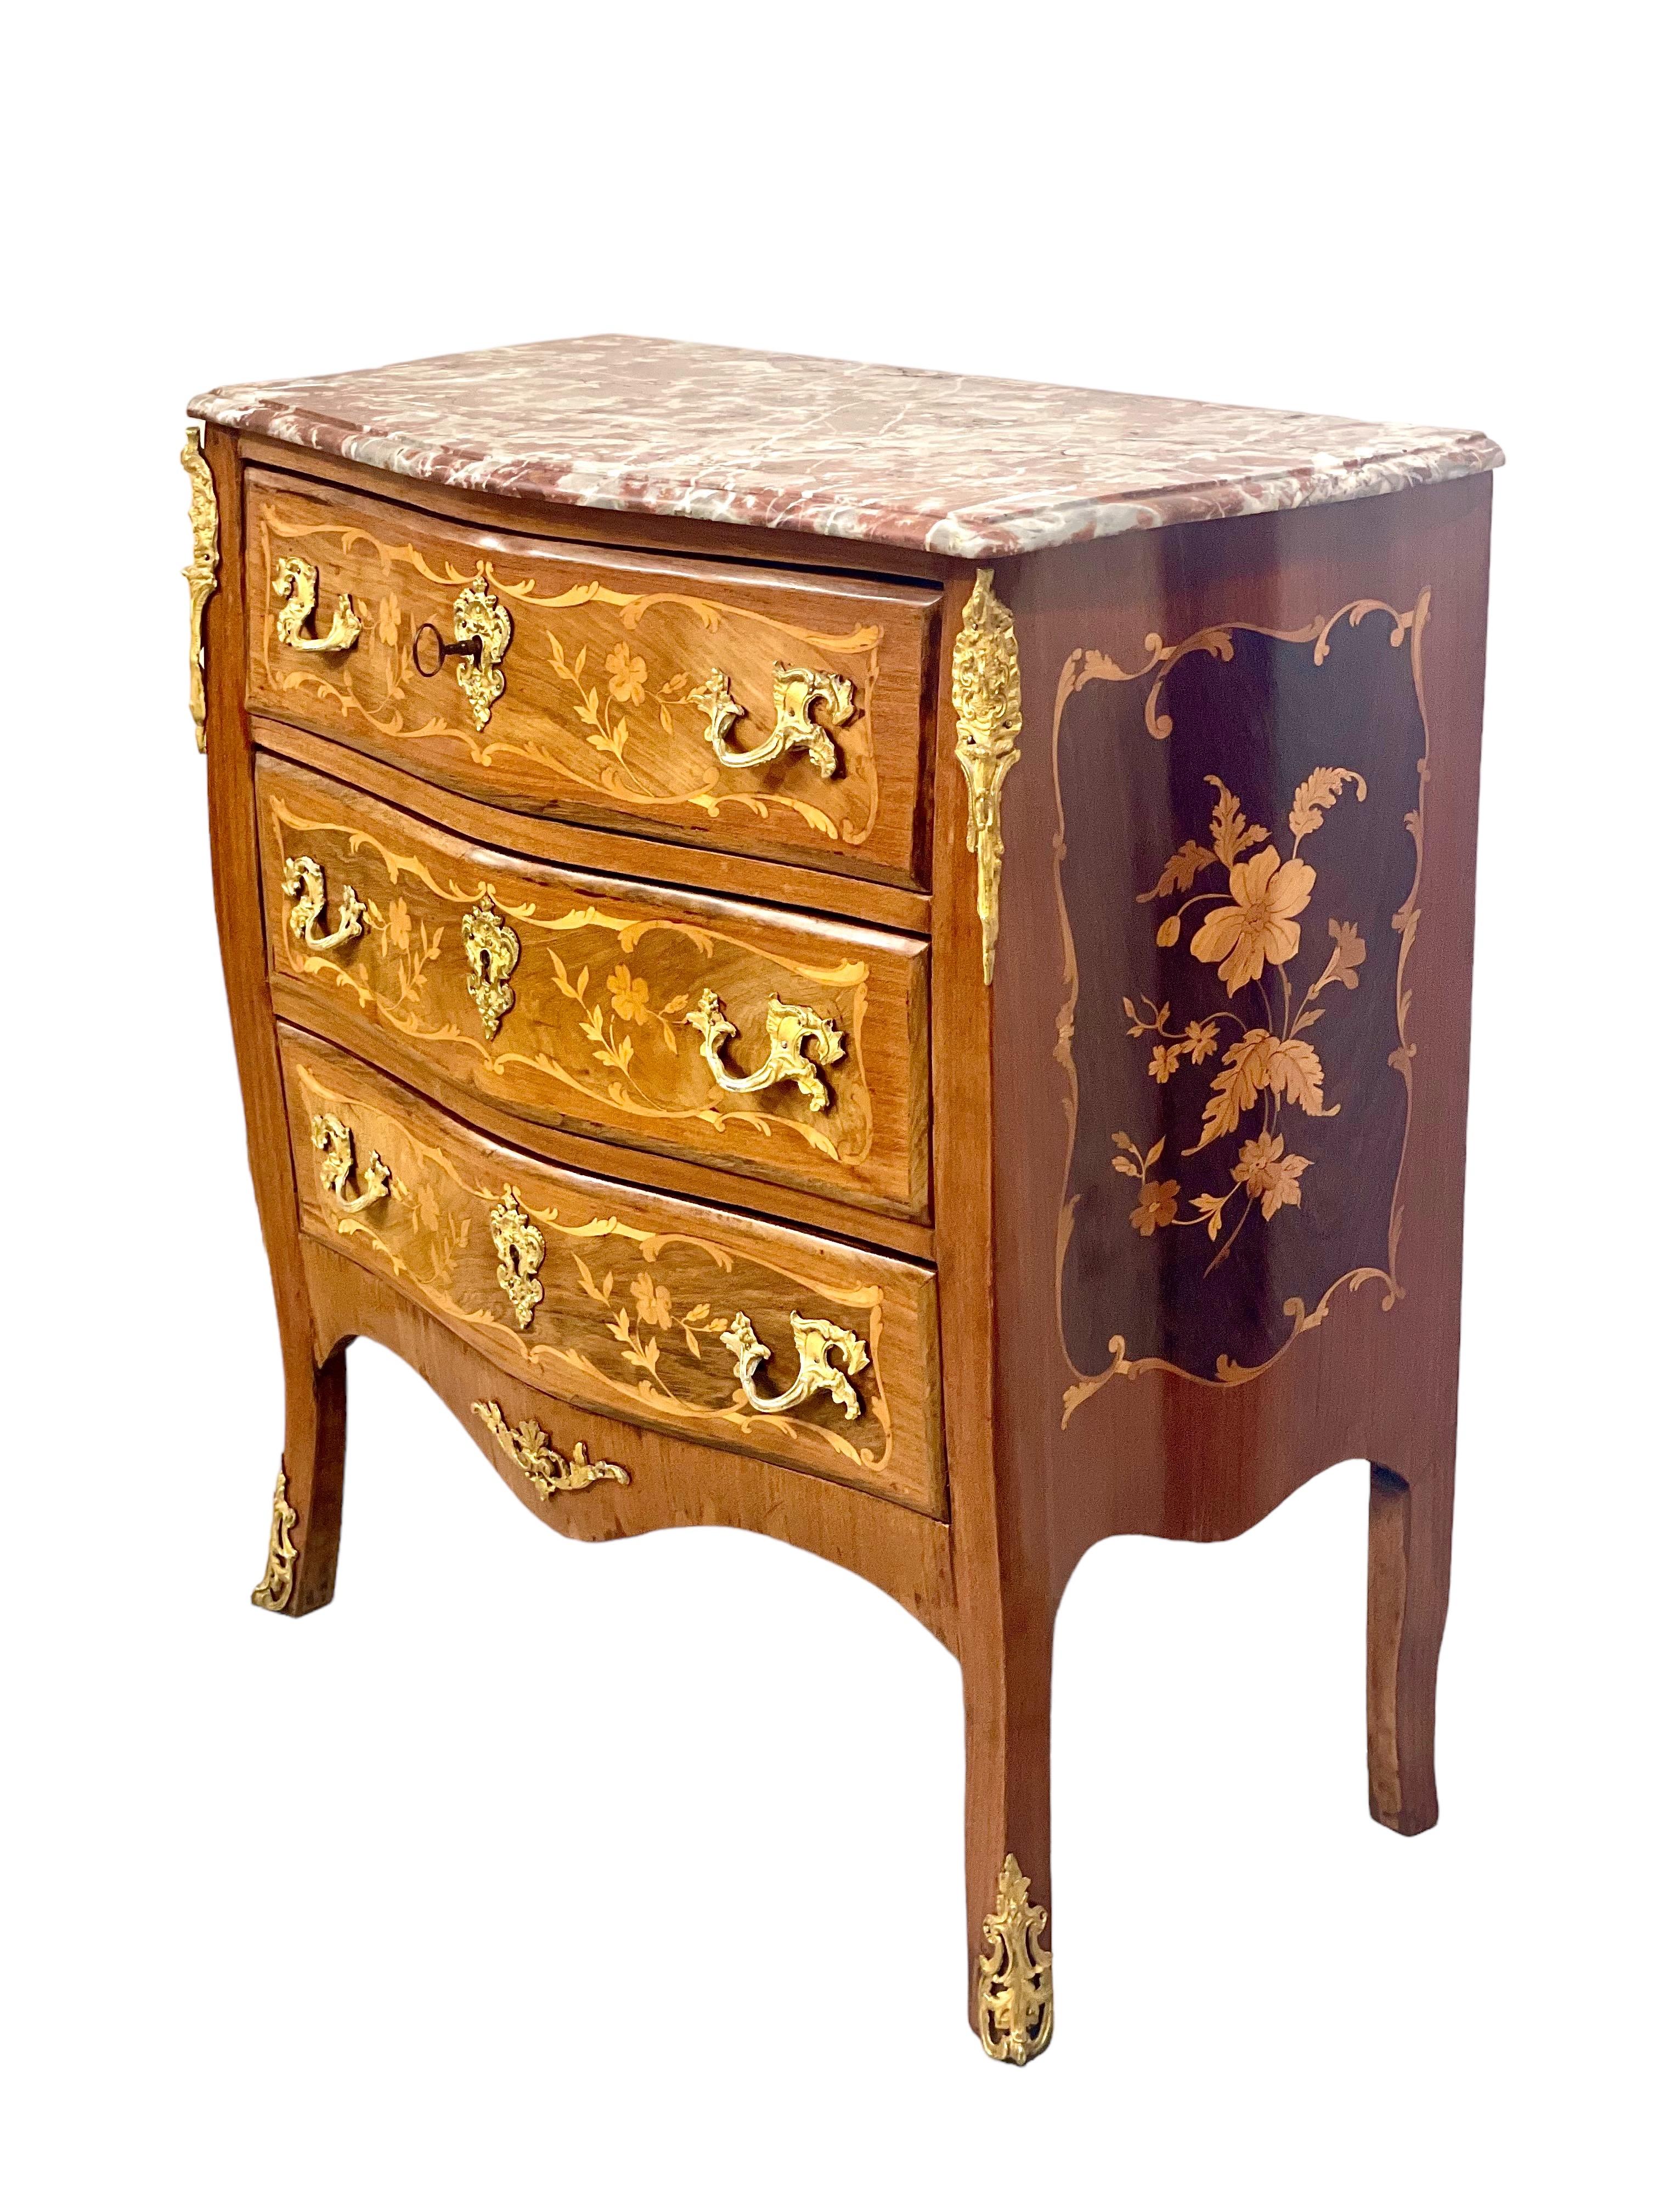 An exquisite and finely constructed Louis XV style chest of three drawers, with original pink- veined marble top and fabulous floral marquetry inlay to each drawer front and sides. Finished in luxurious Rococo style, this 19th century (Napoleon III